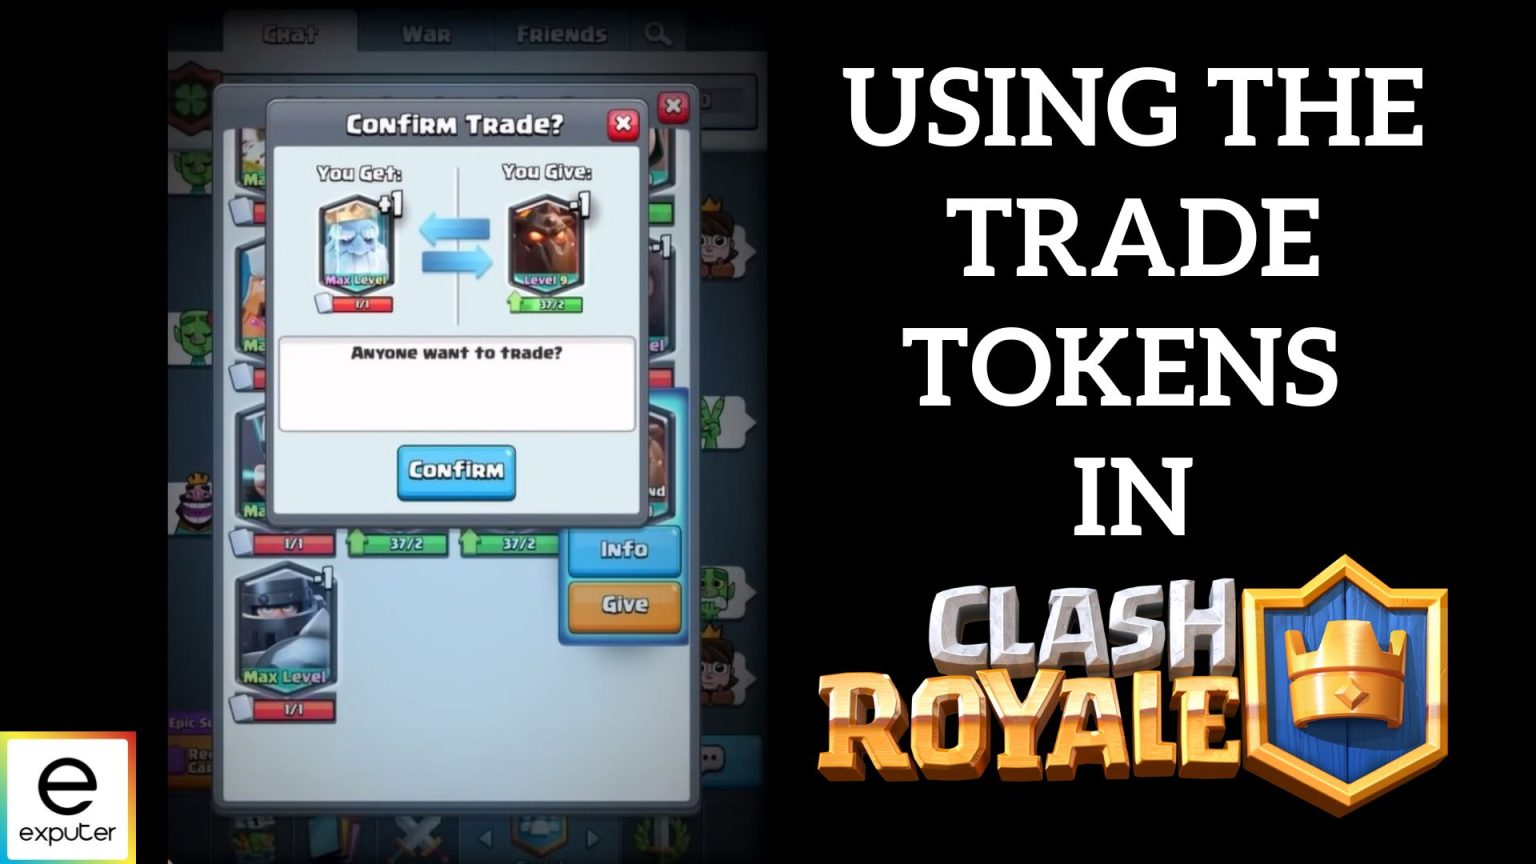 How To Get Trade Tokens In Clash Royale [Explained]